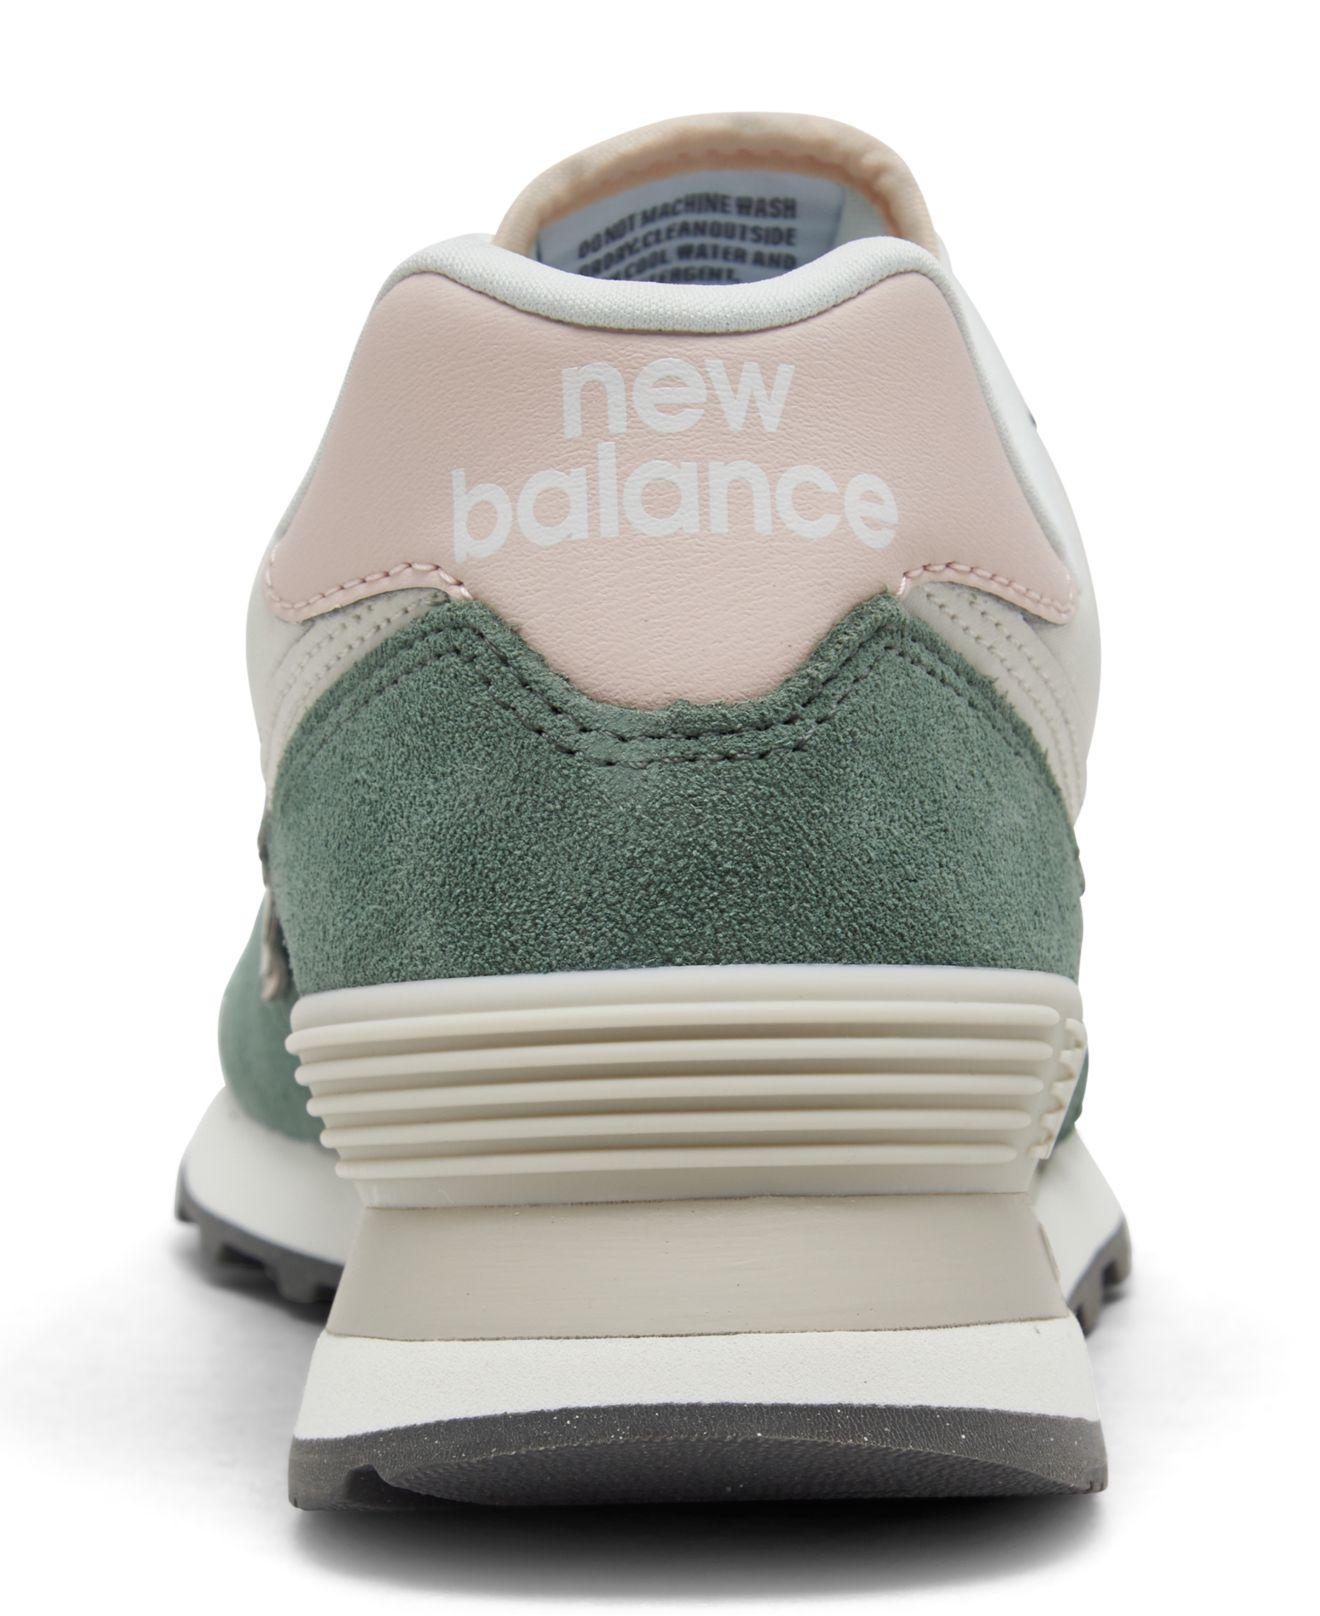 New Balance 574 V2 Casual Sneakers From Finish Line Lyst